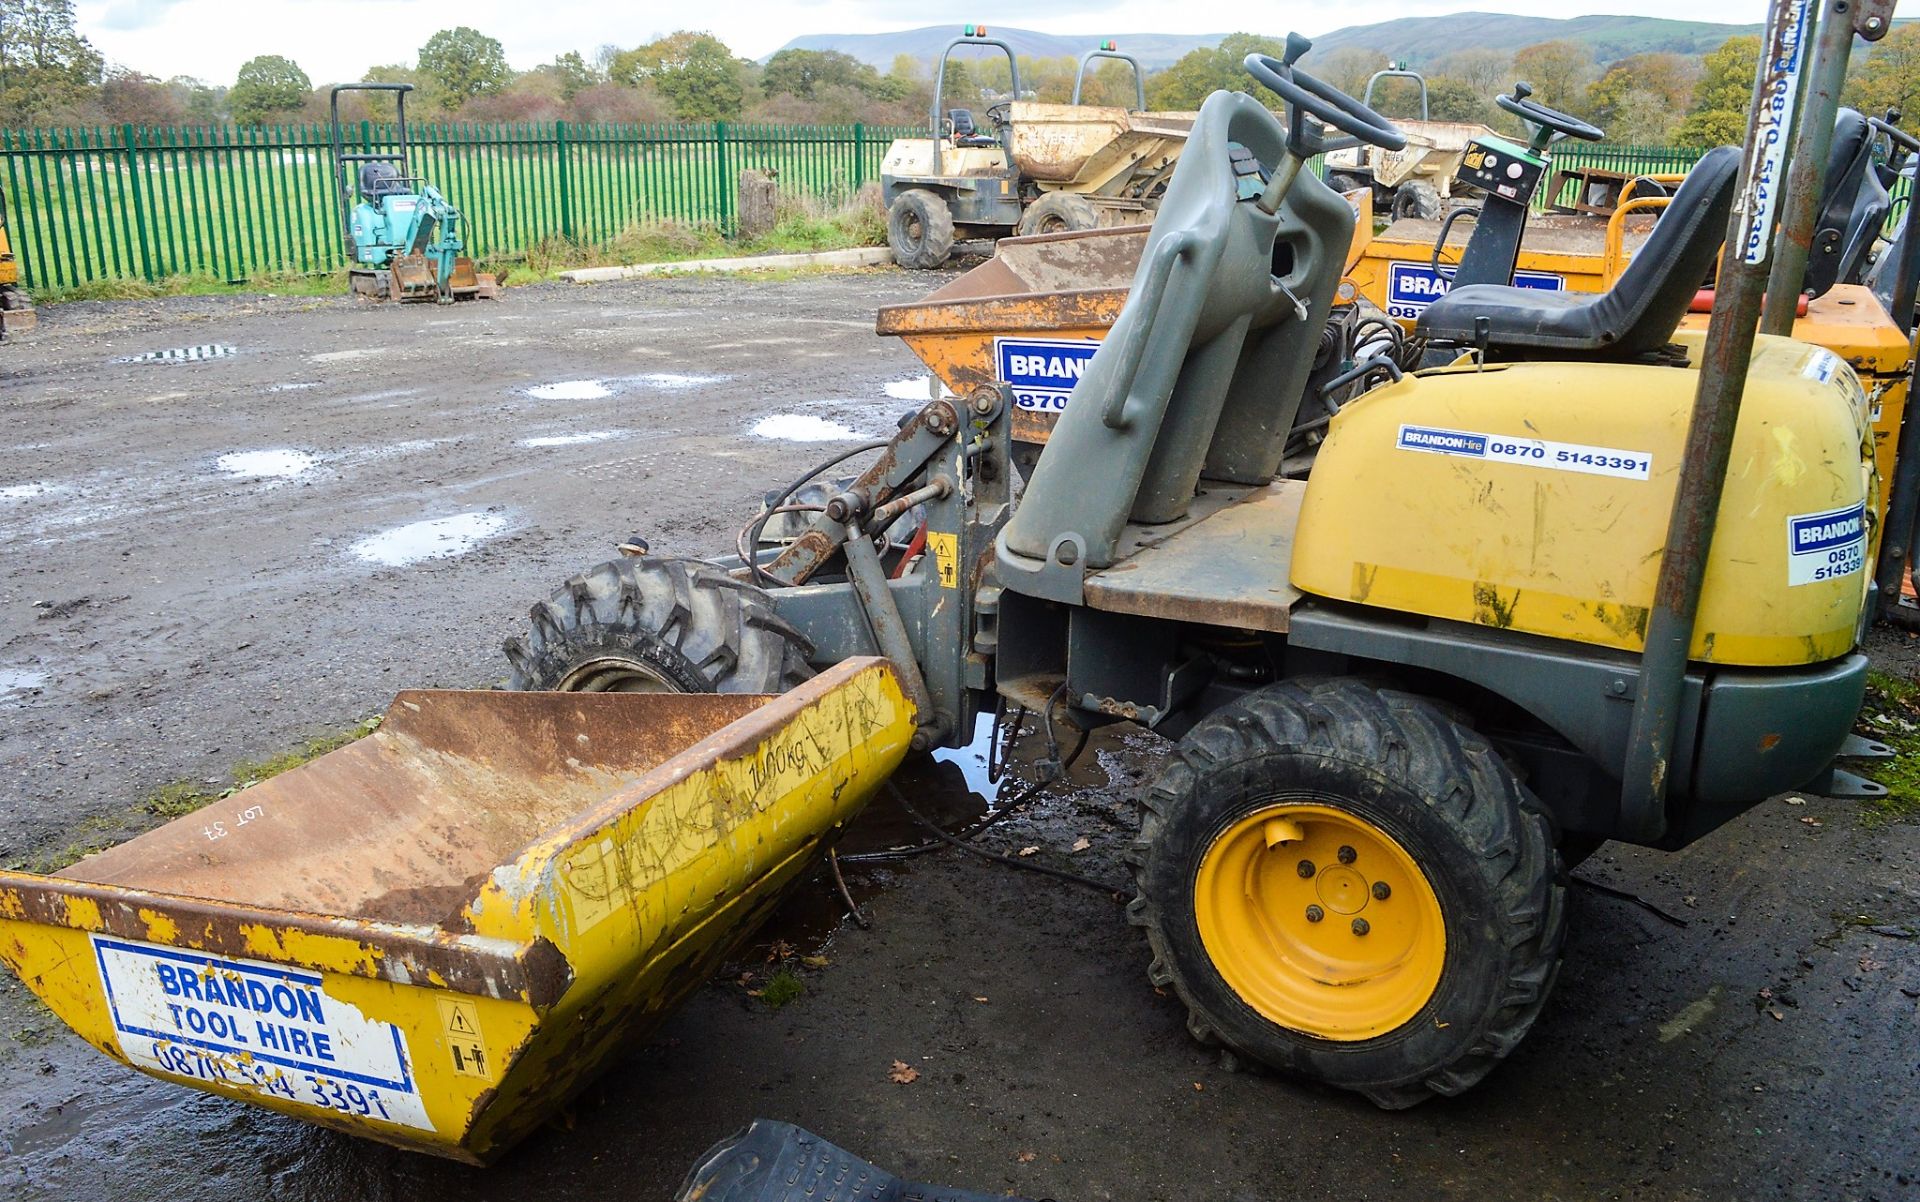 Lifton 850 hi tip dumper Year: 2003 S/N: 833 Recorded Hours: 2313 MG68 ** The machine does not start - Image 4 of 6